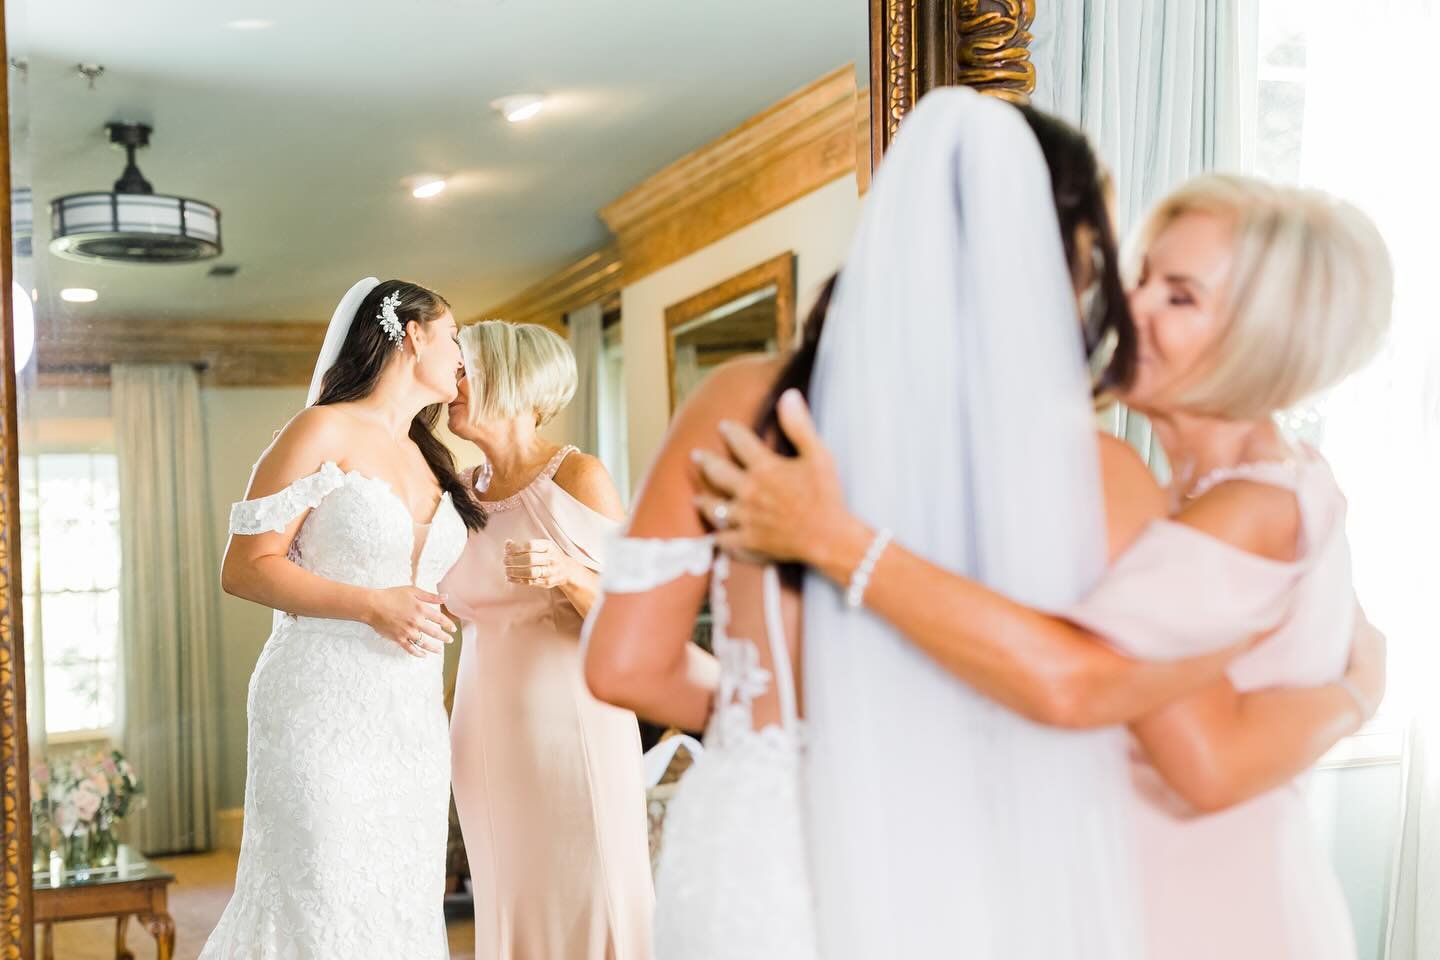 Cherishing these moments on Mother&rsquo;s Day and every day 💕 A beautiful capture of a bride and her mom getting ready in our bridal suite, filled with love and anticipation. Happy Mother&rsquo;s Day to all the incredible moms who make these unforg